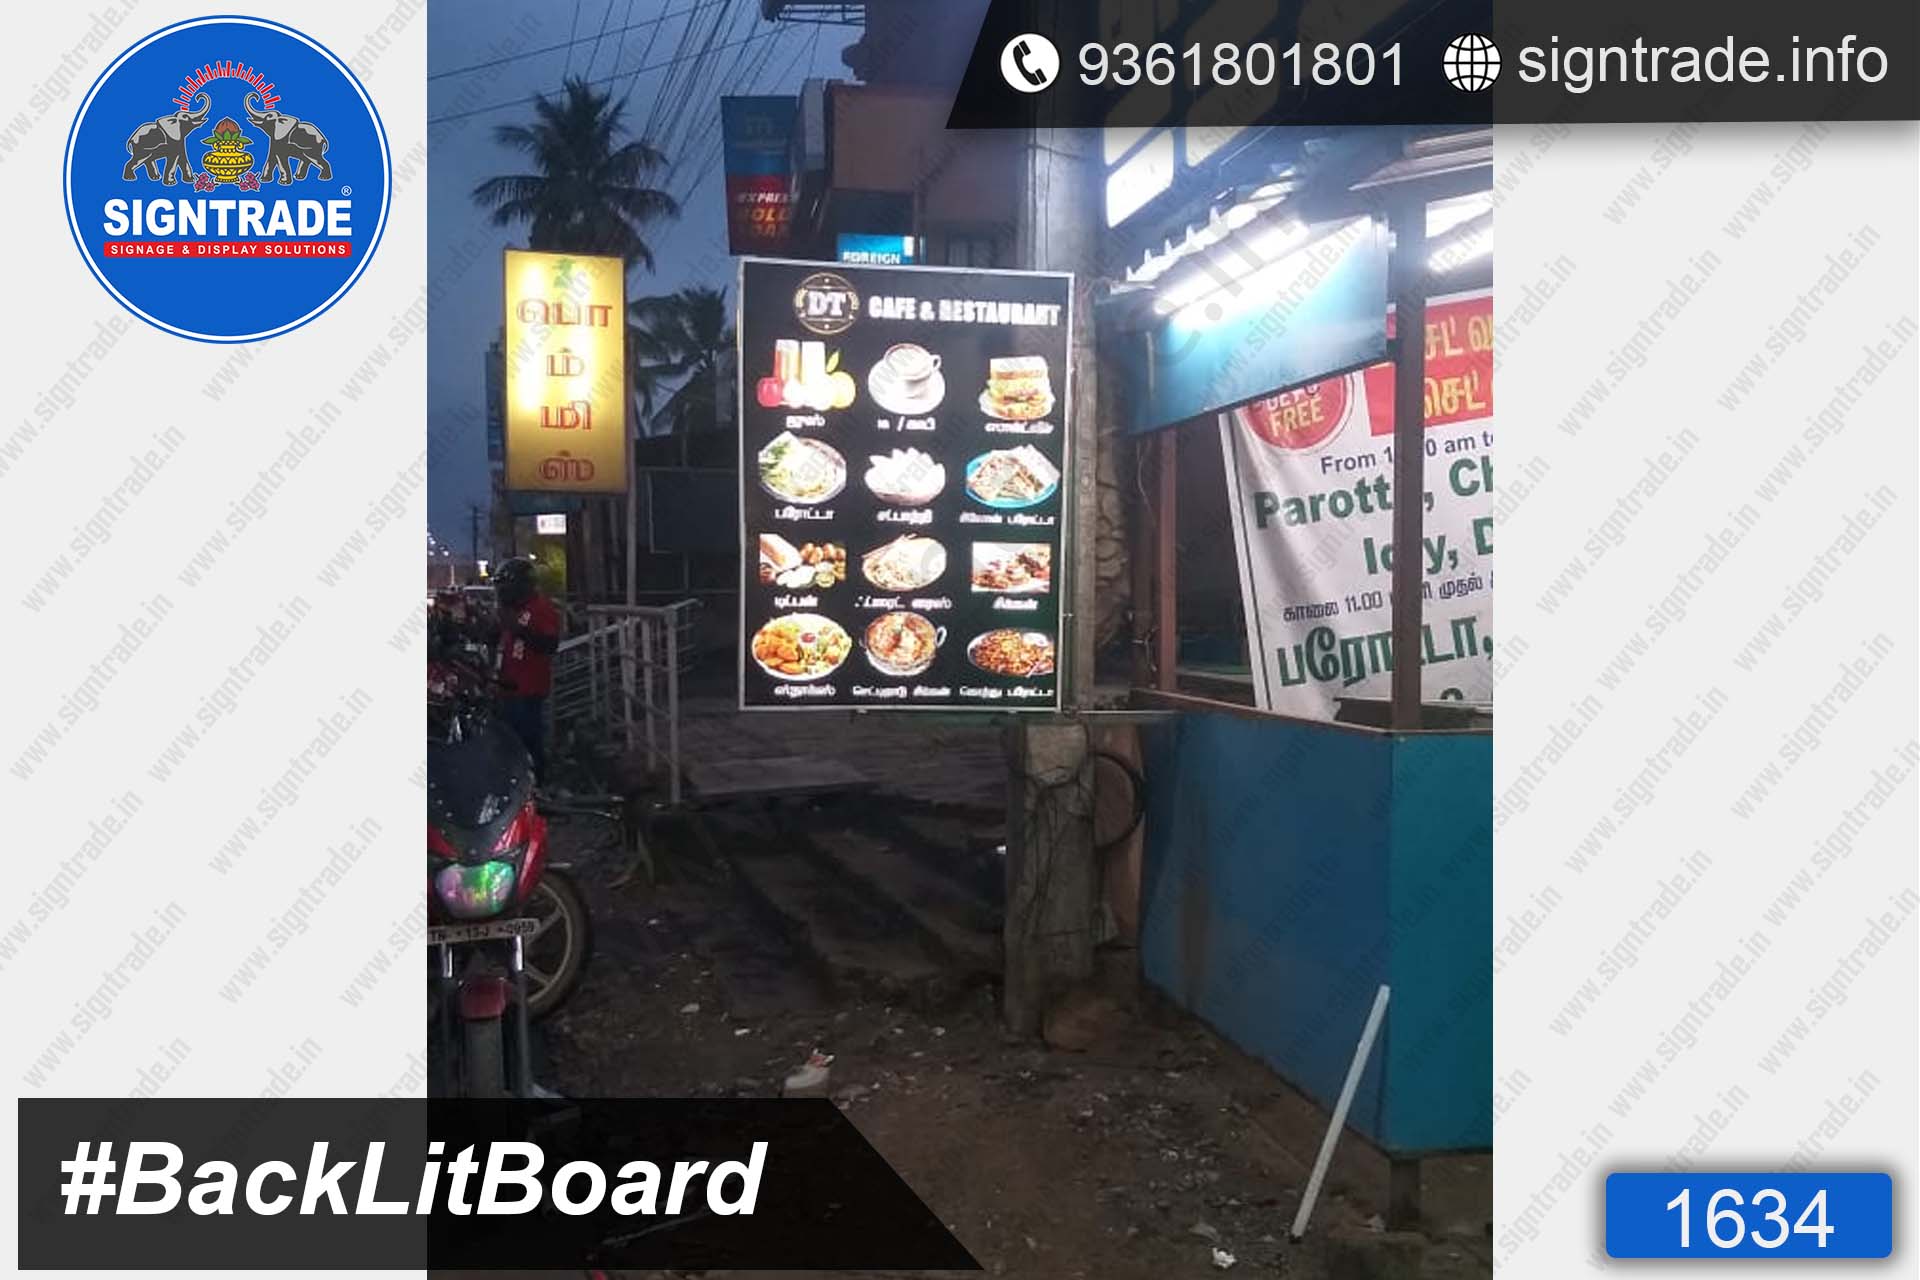 DT Cafe and Restaurant, Chennai - SIGNTRADE - Backlit Board Manufacturers in Chennai